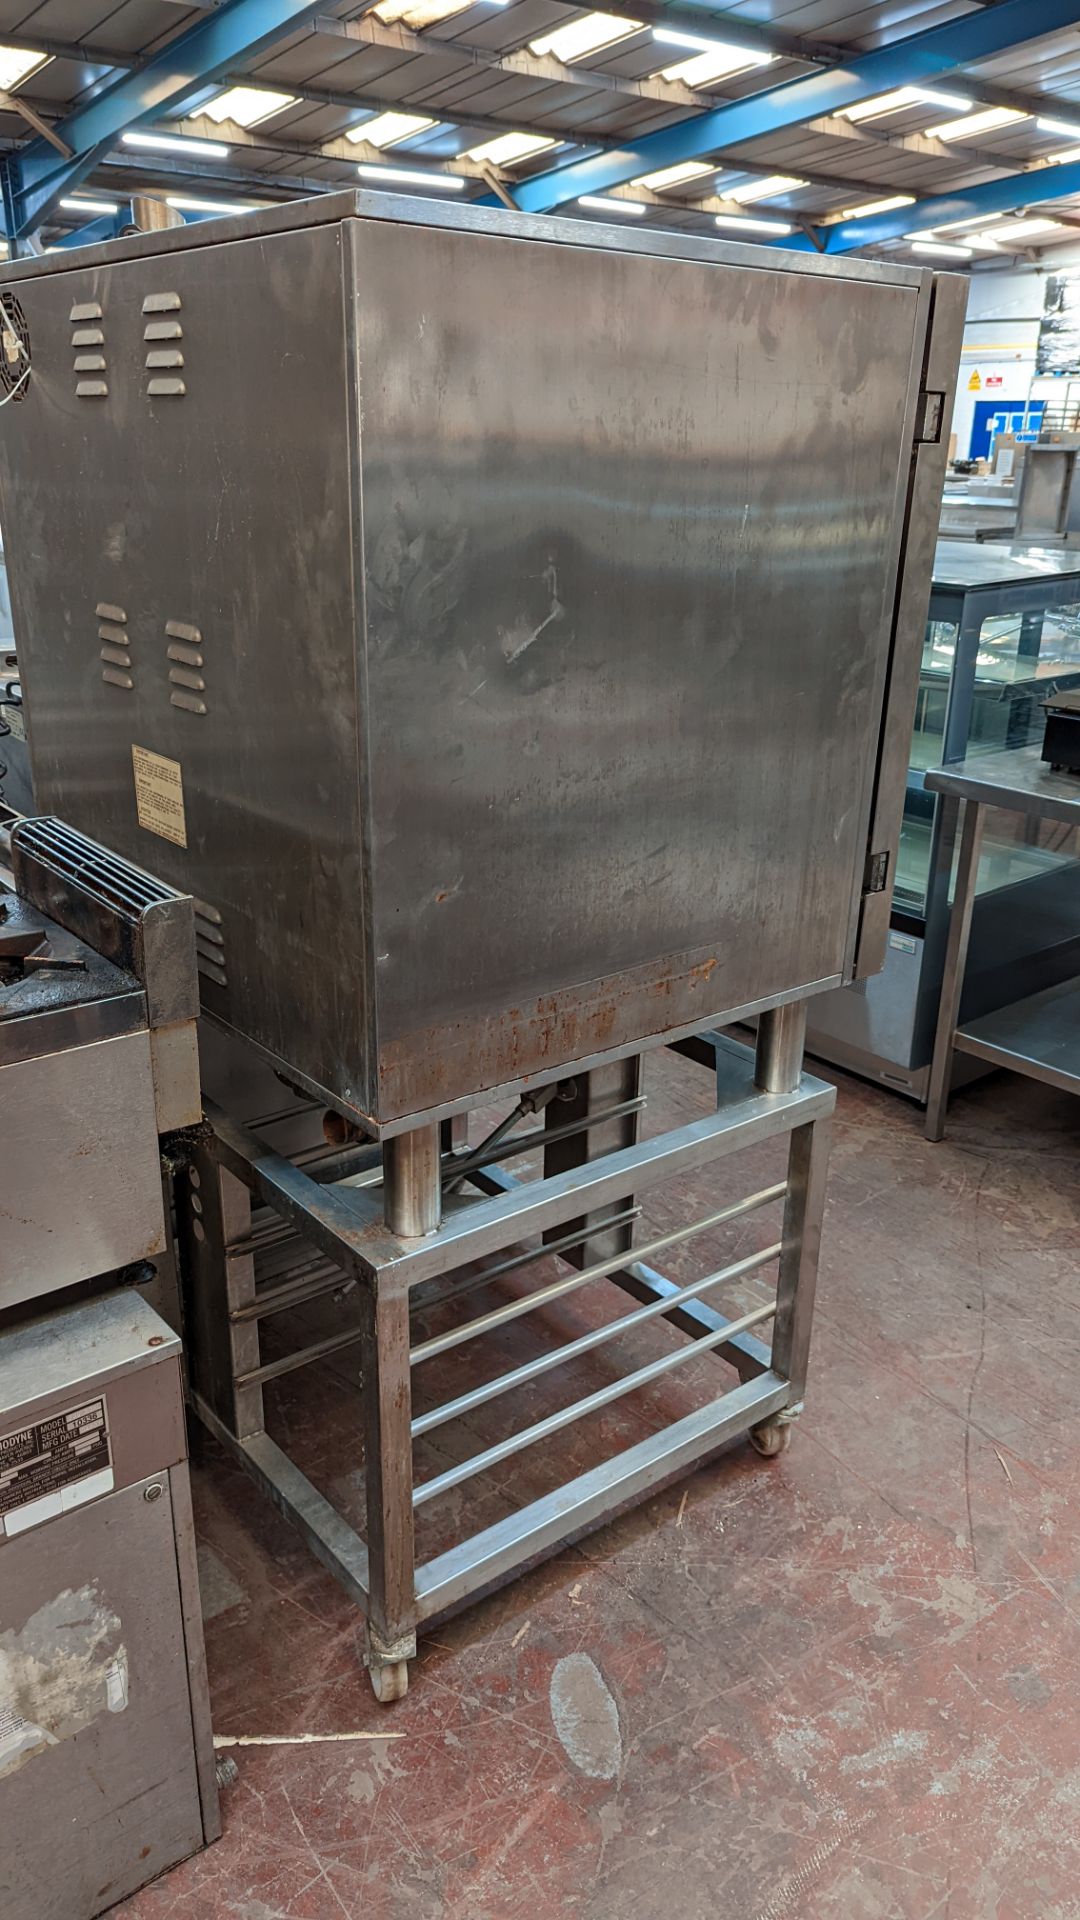 Hobart stainless steel large commercial oven on mobile stand - Image 8 of 8